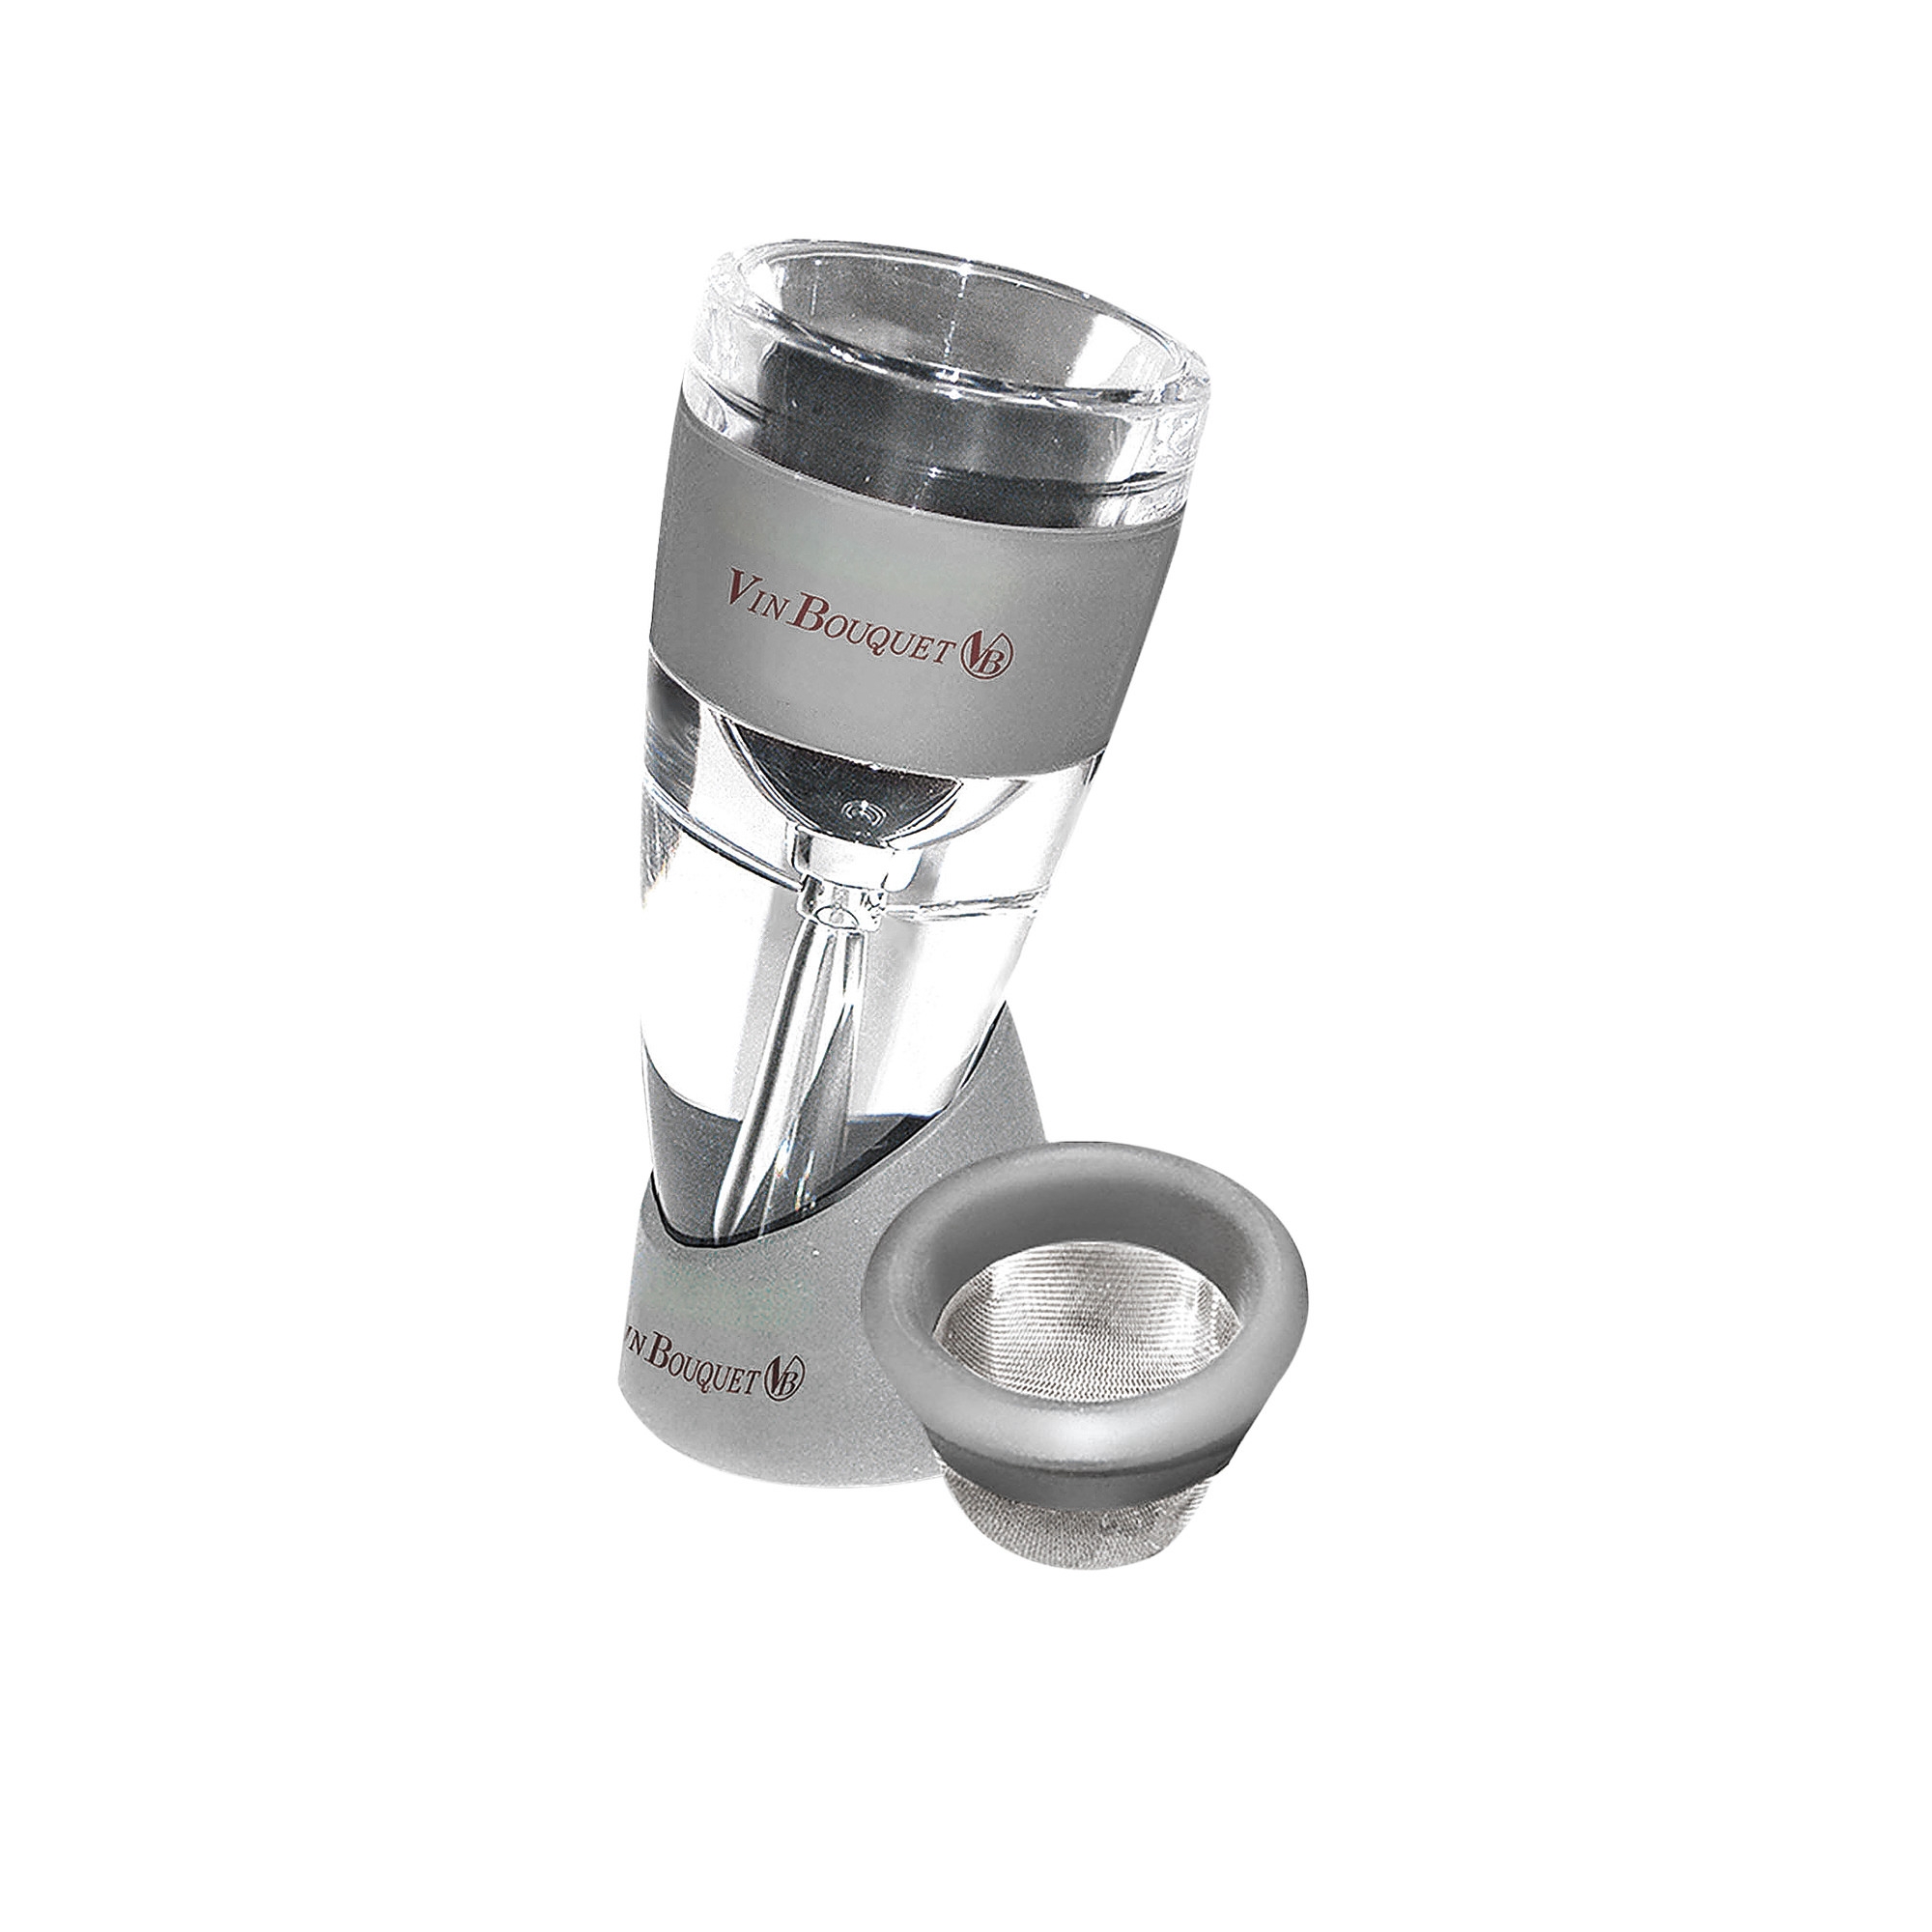 Vin Bouquet Aerator on Stand Image 1